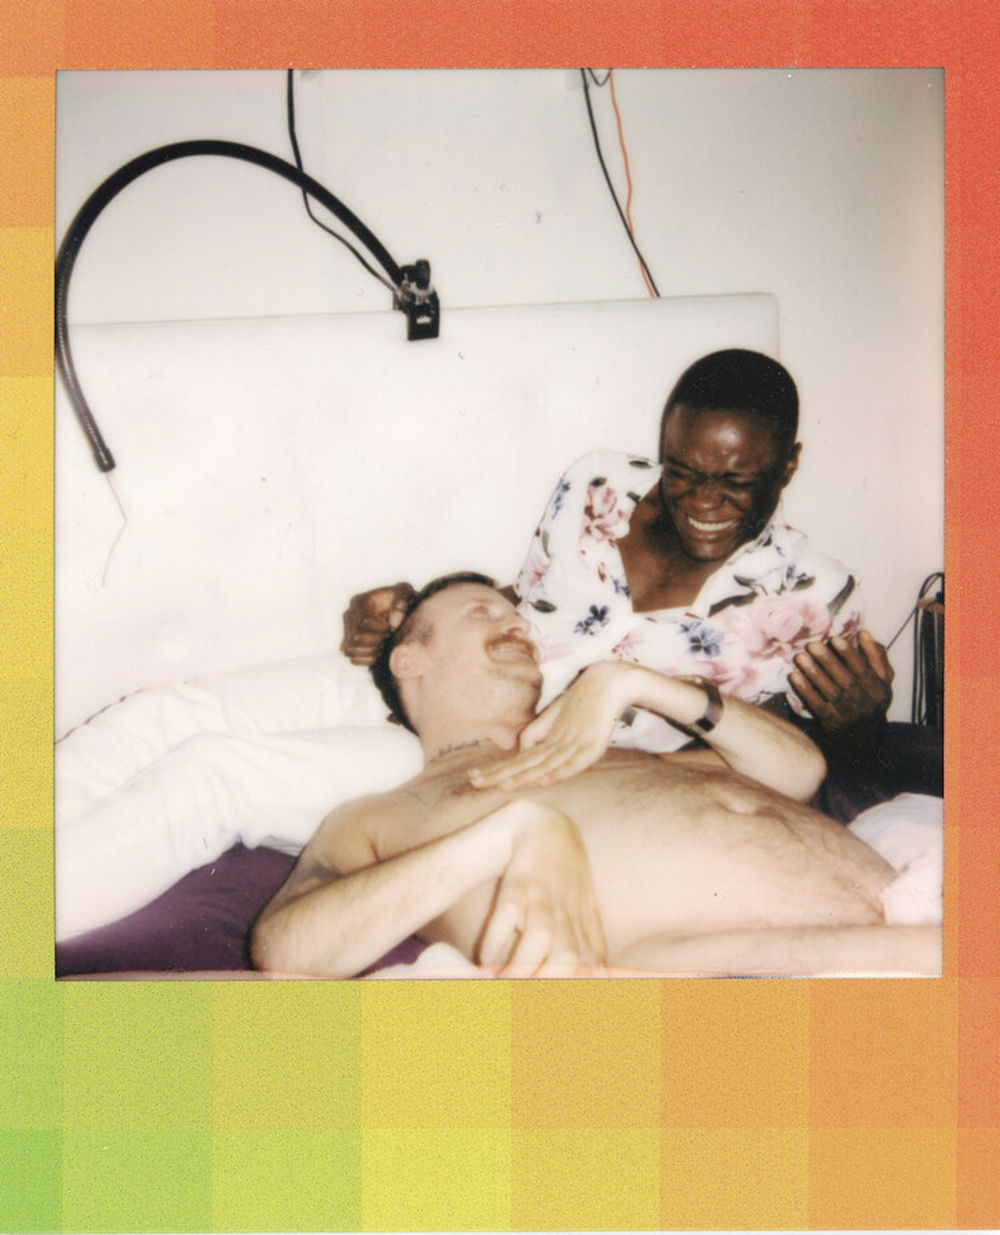 A brightly lit photograph of a shirtless White person laying in the lap of a Black person. Both figures' features are somewhat obscured by the brightness of the photograph, however, their relaxed poses and candid smiles are friendly and intimate. A multicolored border surrounds the photograph, a dreamy composition of green, orange, and yellow pixelated squares creating a soft gradient.